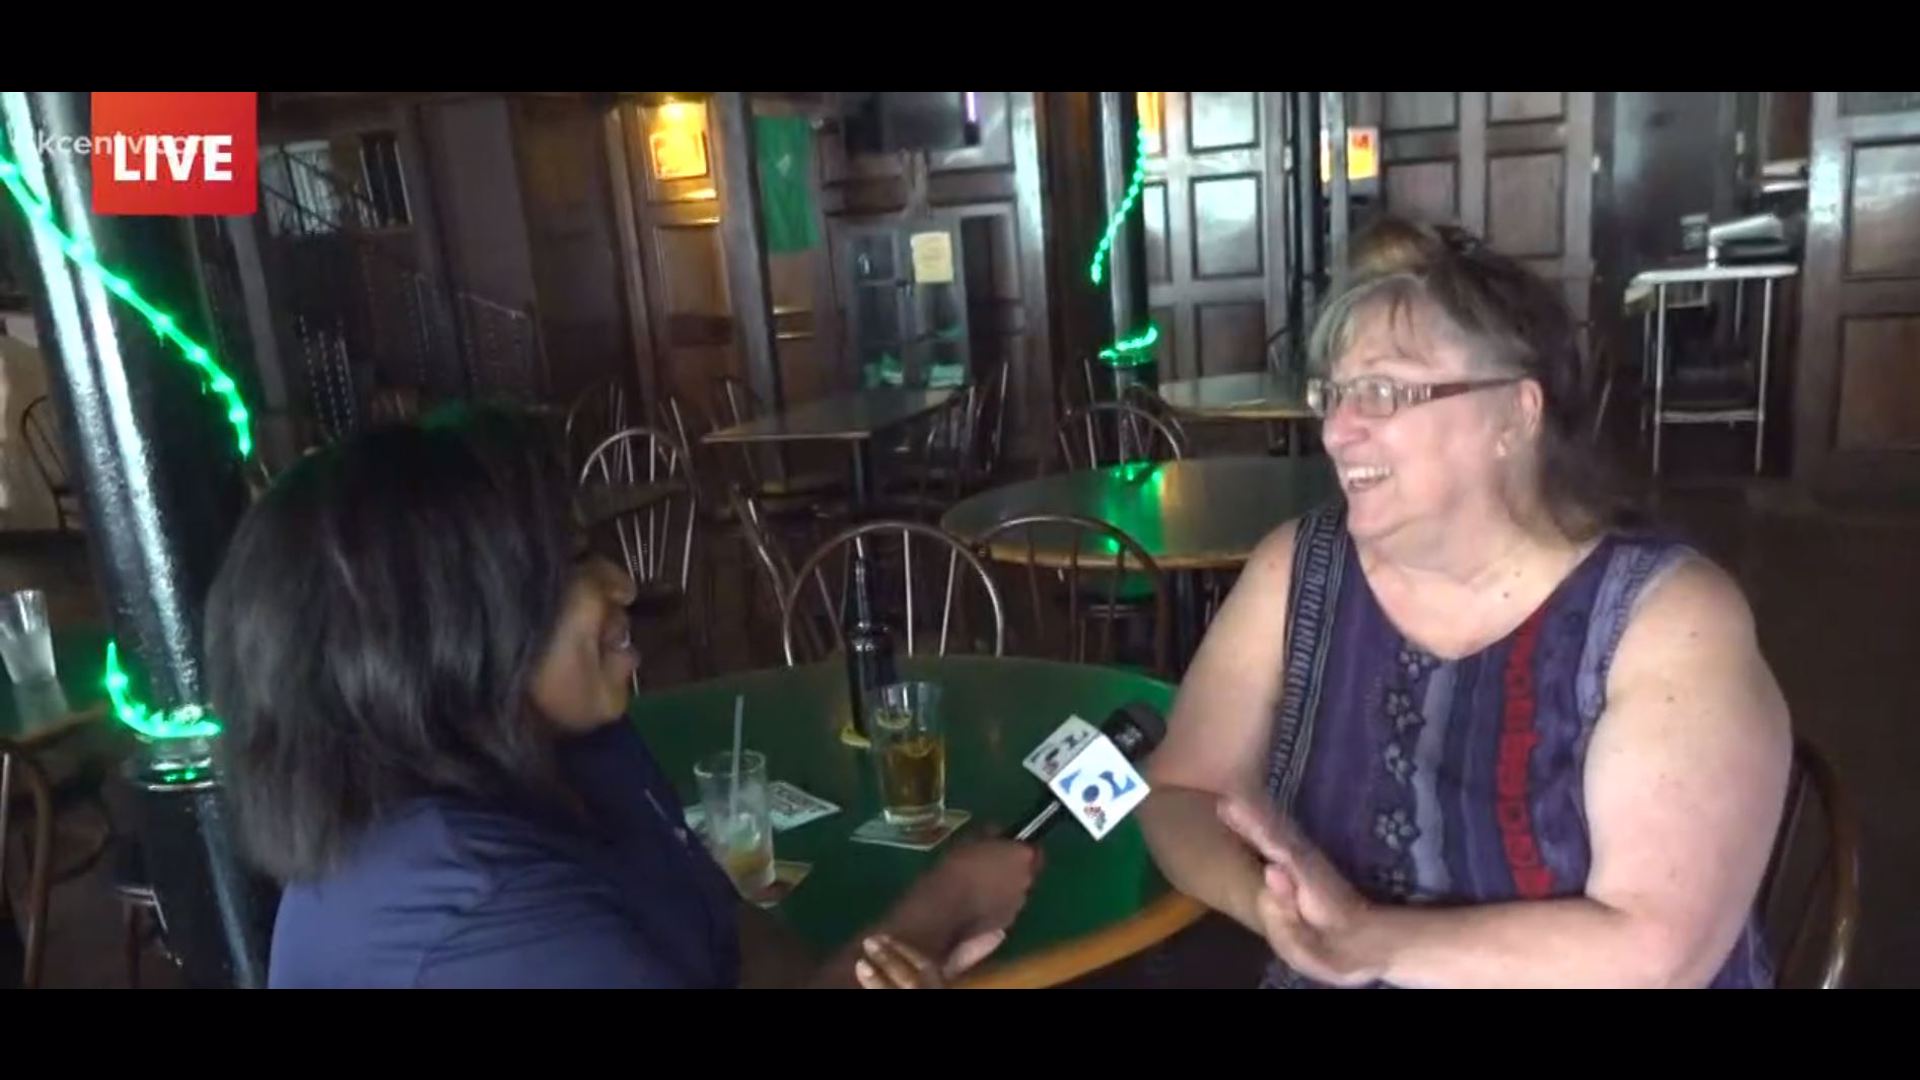 KCEN Channel 6 reporter Jasmin Caldwell was at O'Briens for downtown Temple's First Friday of the month. You can get 20% off your bill at that bar tonight!